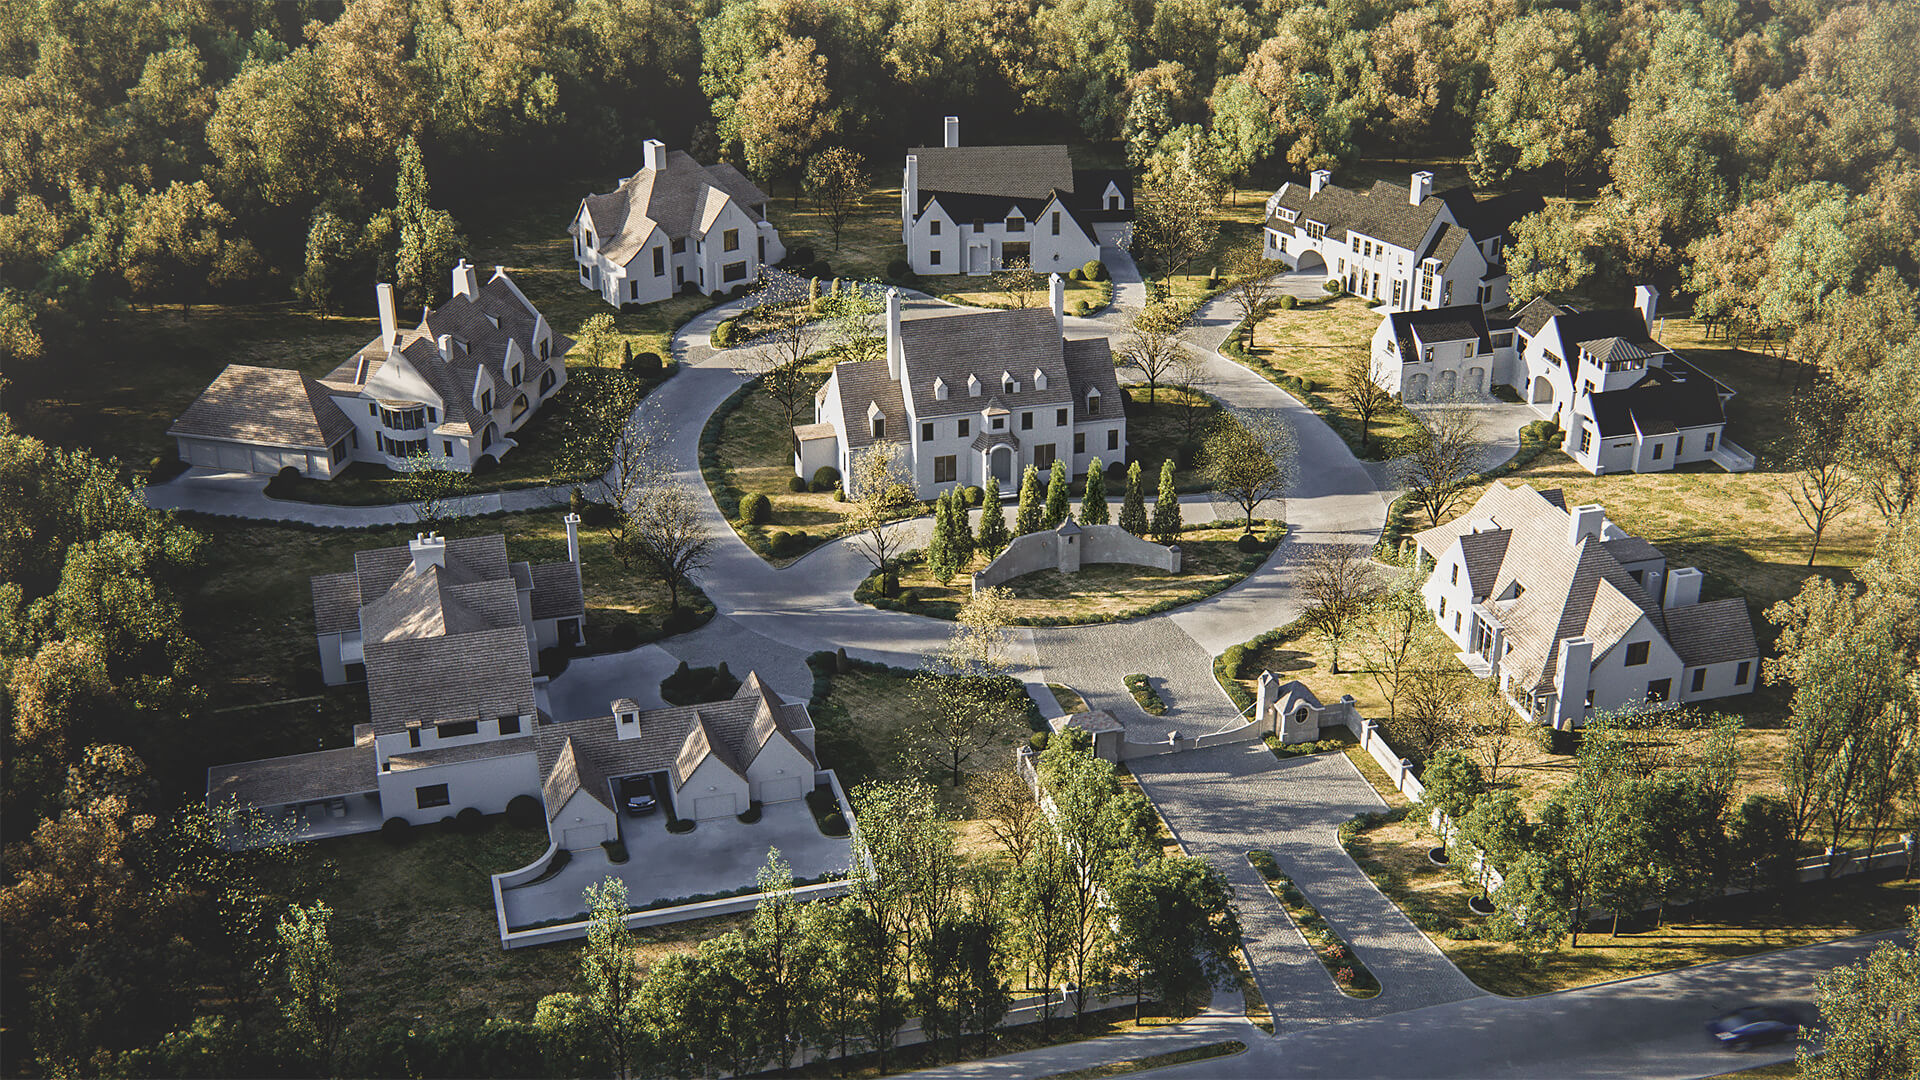 Exterior CG Render Featuring Beautiful Rural Area with Country Houses